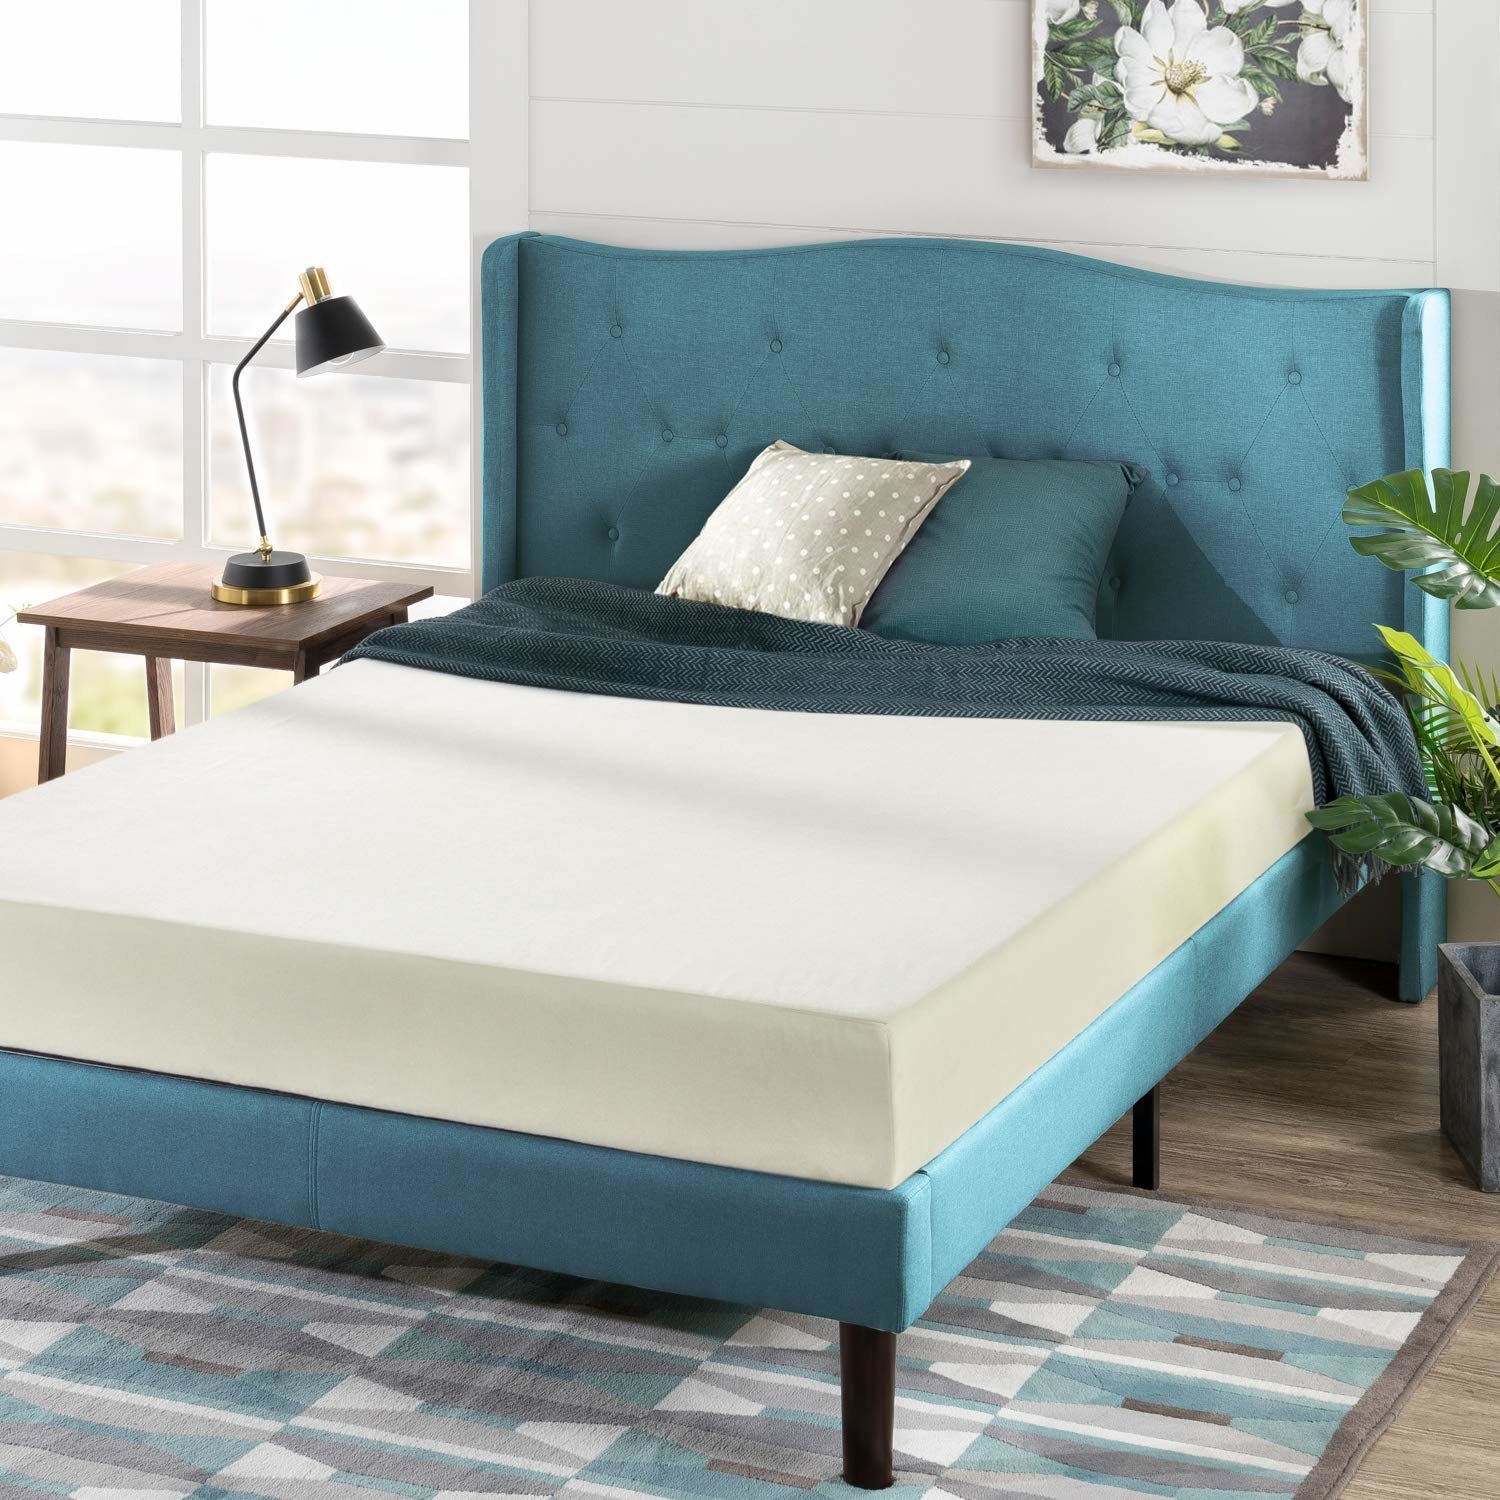 A thick foam mattress on a bed with pillows